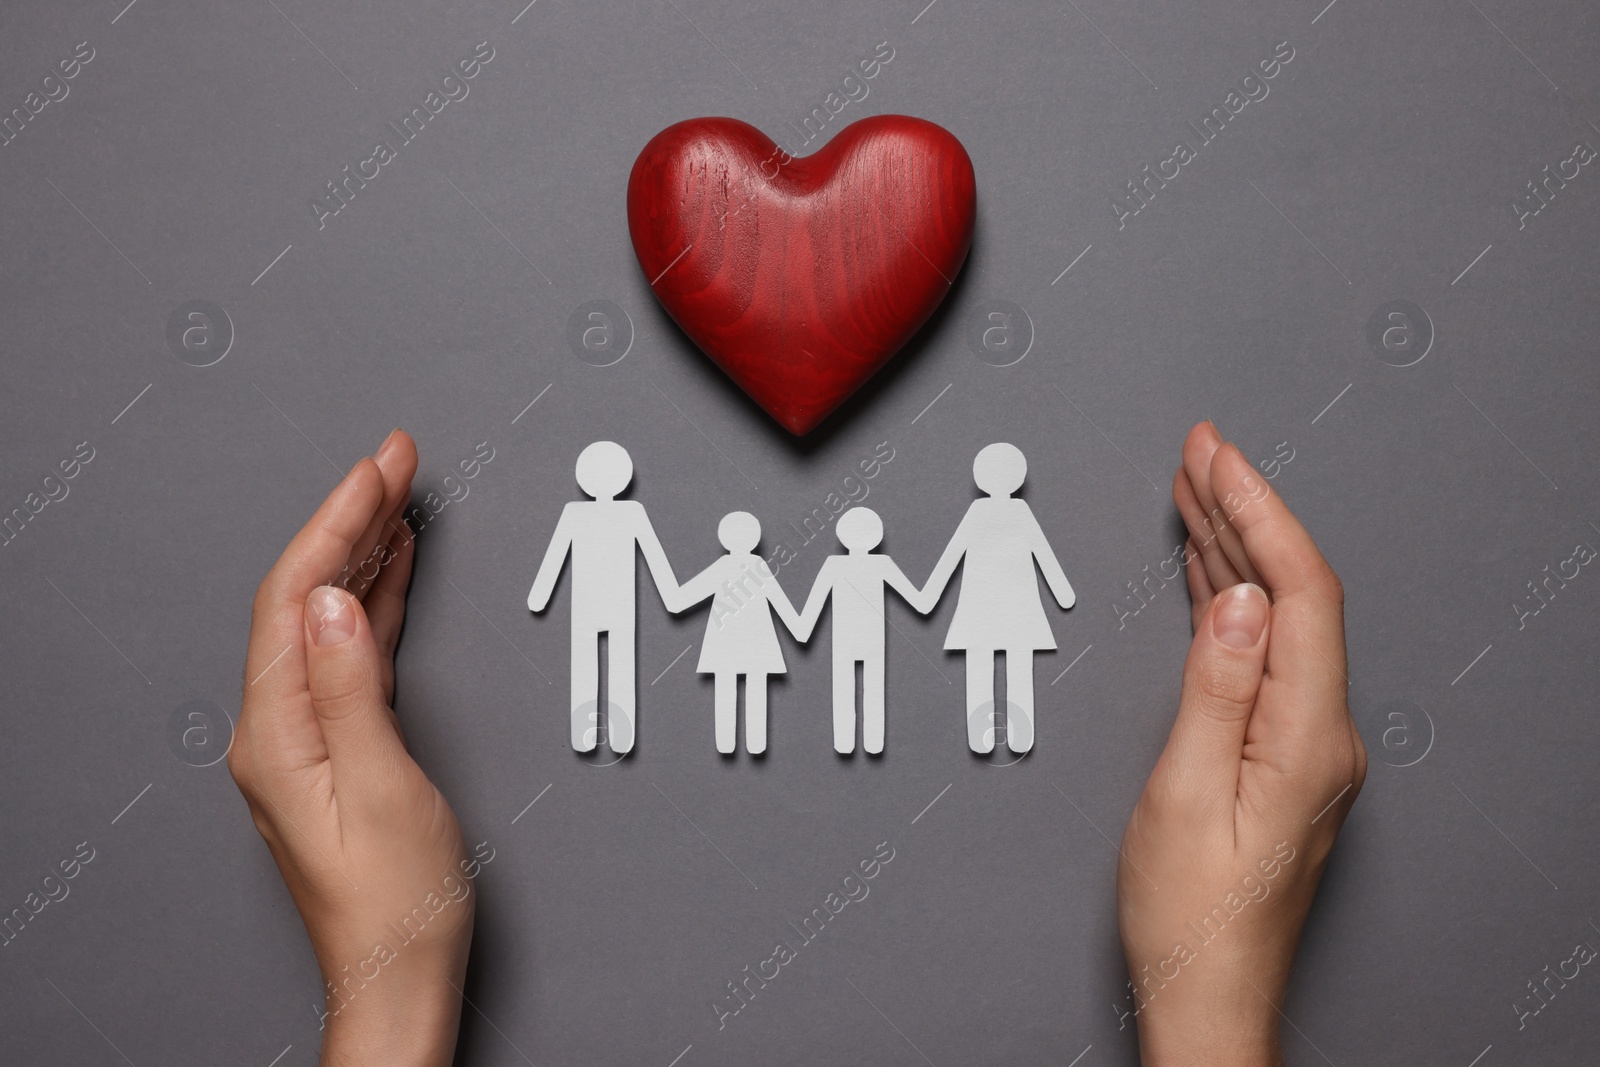 Photo of Woman protecting paper family figures and red wooden heart on grey background, top view. Insurance concept